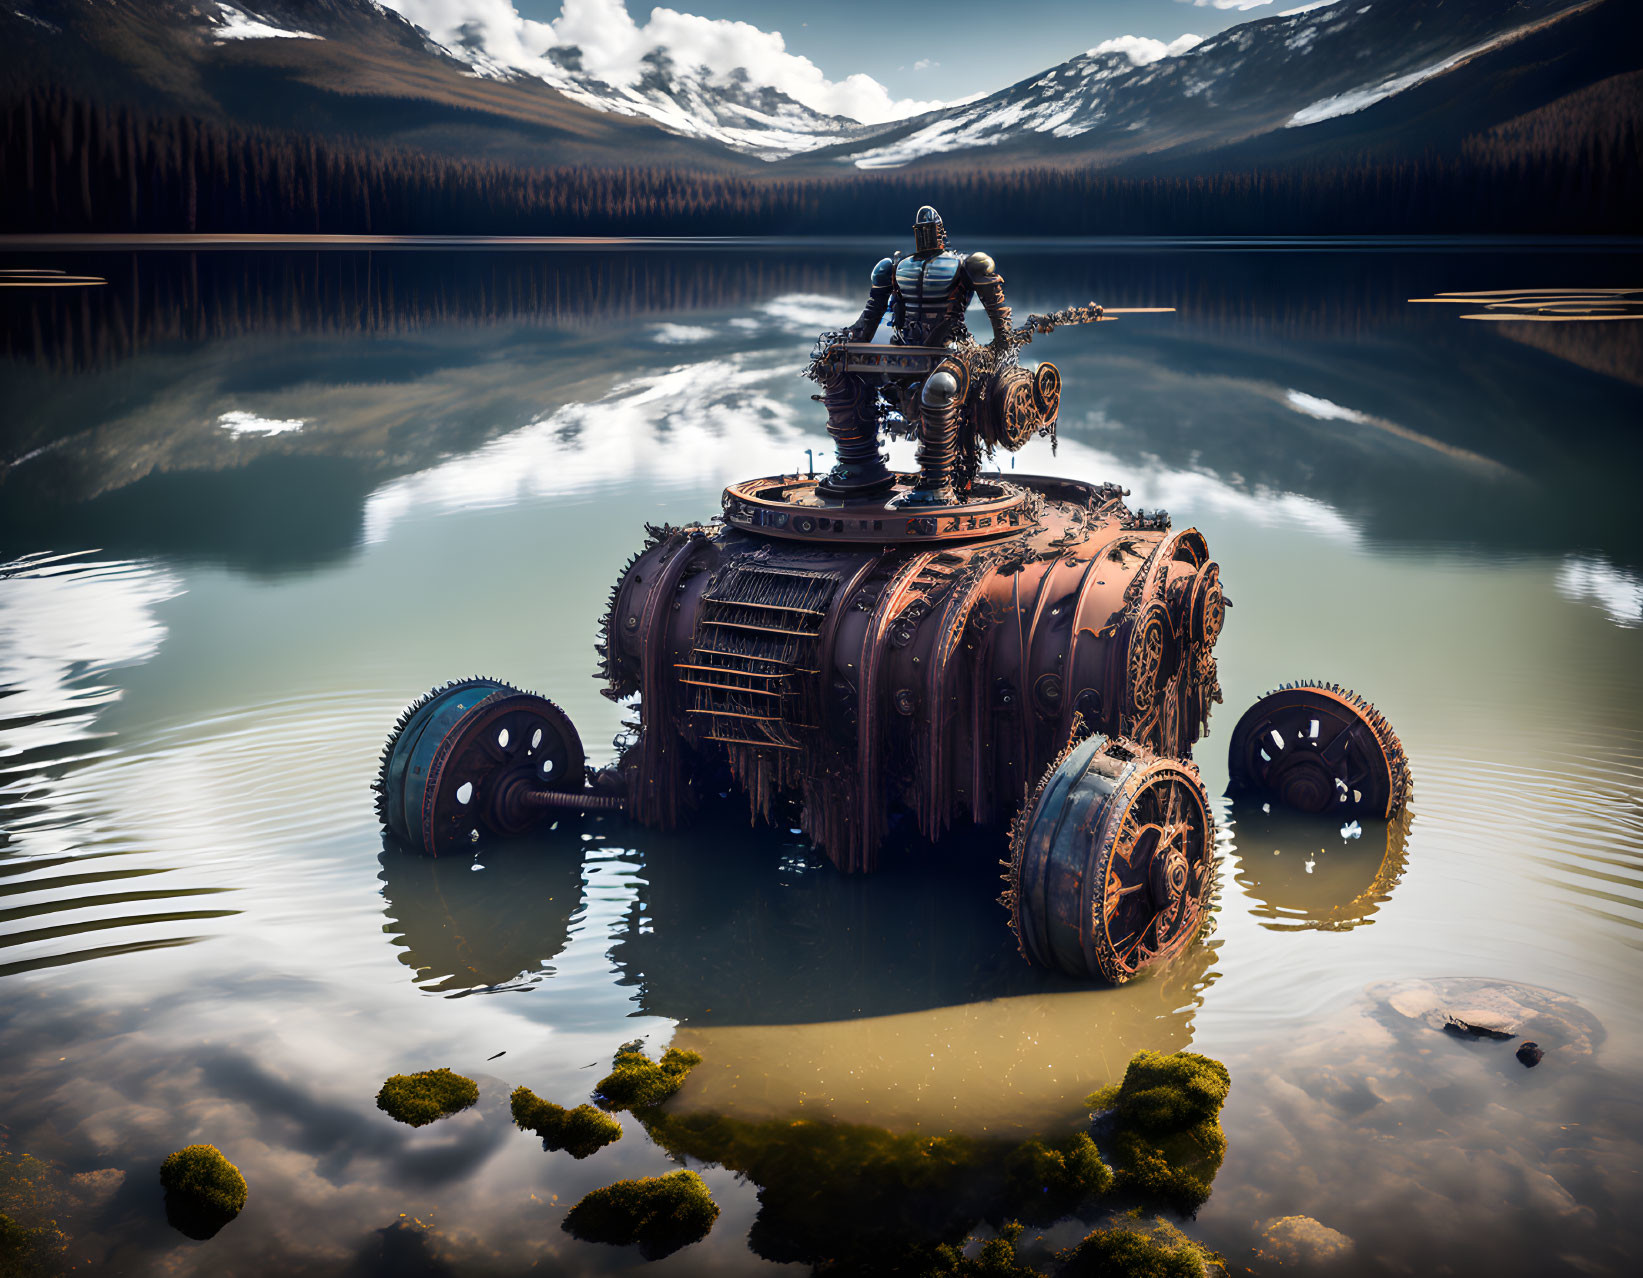 Steampunk-style tank with gears near serene lake and mountains